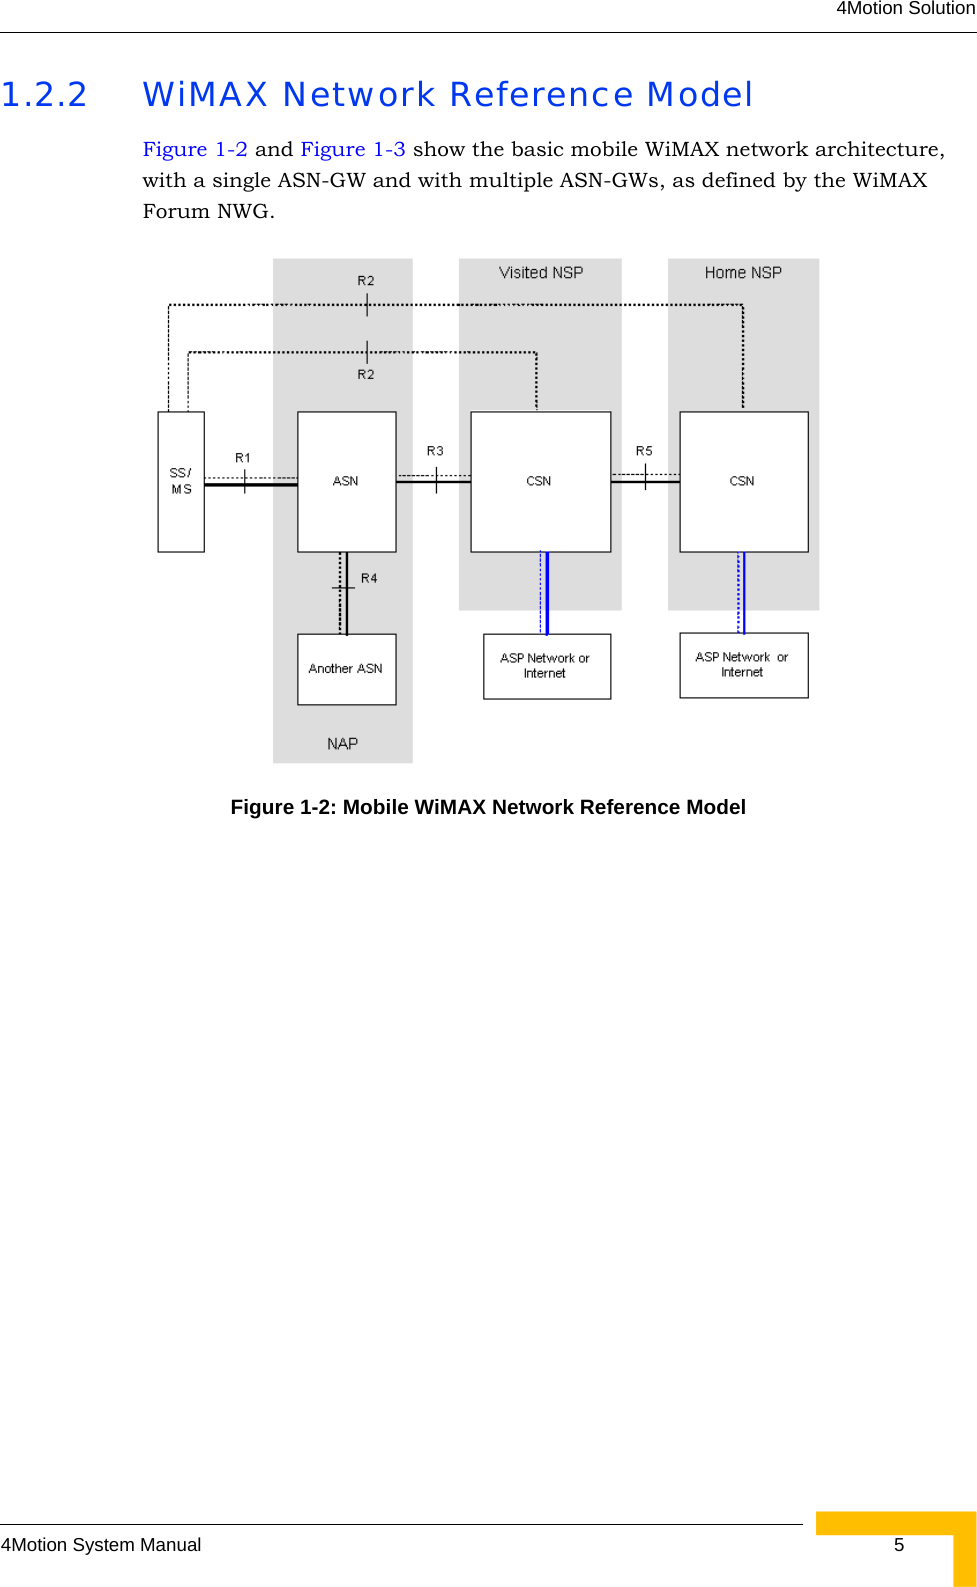 4Motion Solution4Motion System Manual  51.2.2 WiMAX Network Reference ModelFigure 1-2 and Figure 1-3 show the basic mobile WiMAX network architecture, with a single ASN-GW and with multiple ASN-GWs, as defined by the WiMAX Forum NWG.Figure 1-2: Mobile WiMAX Network Reference Model